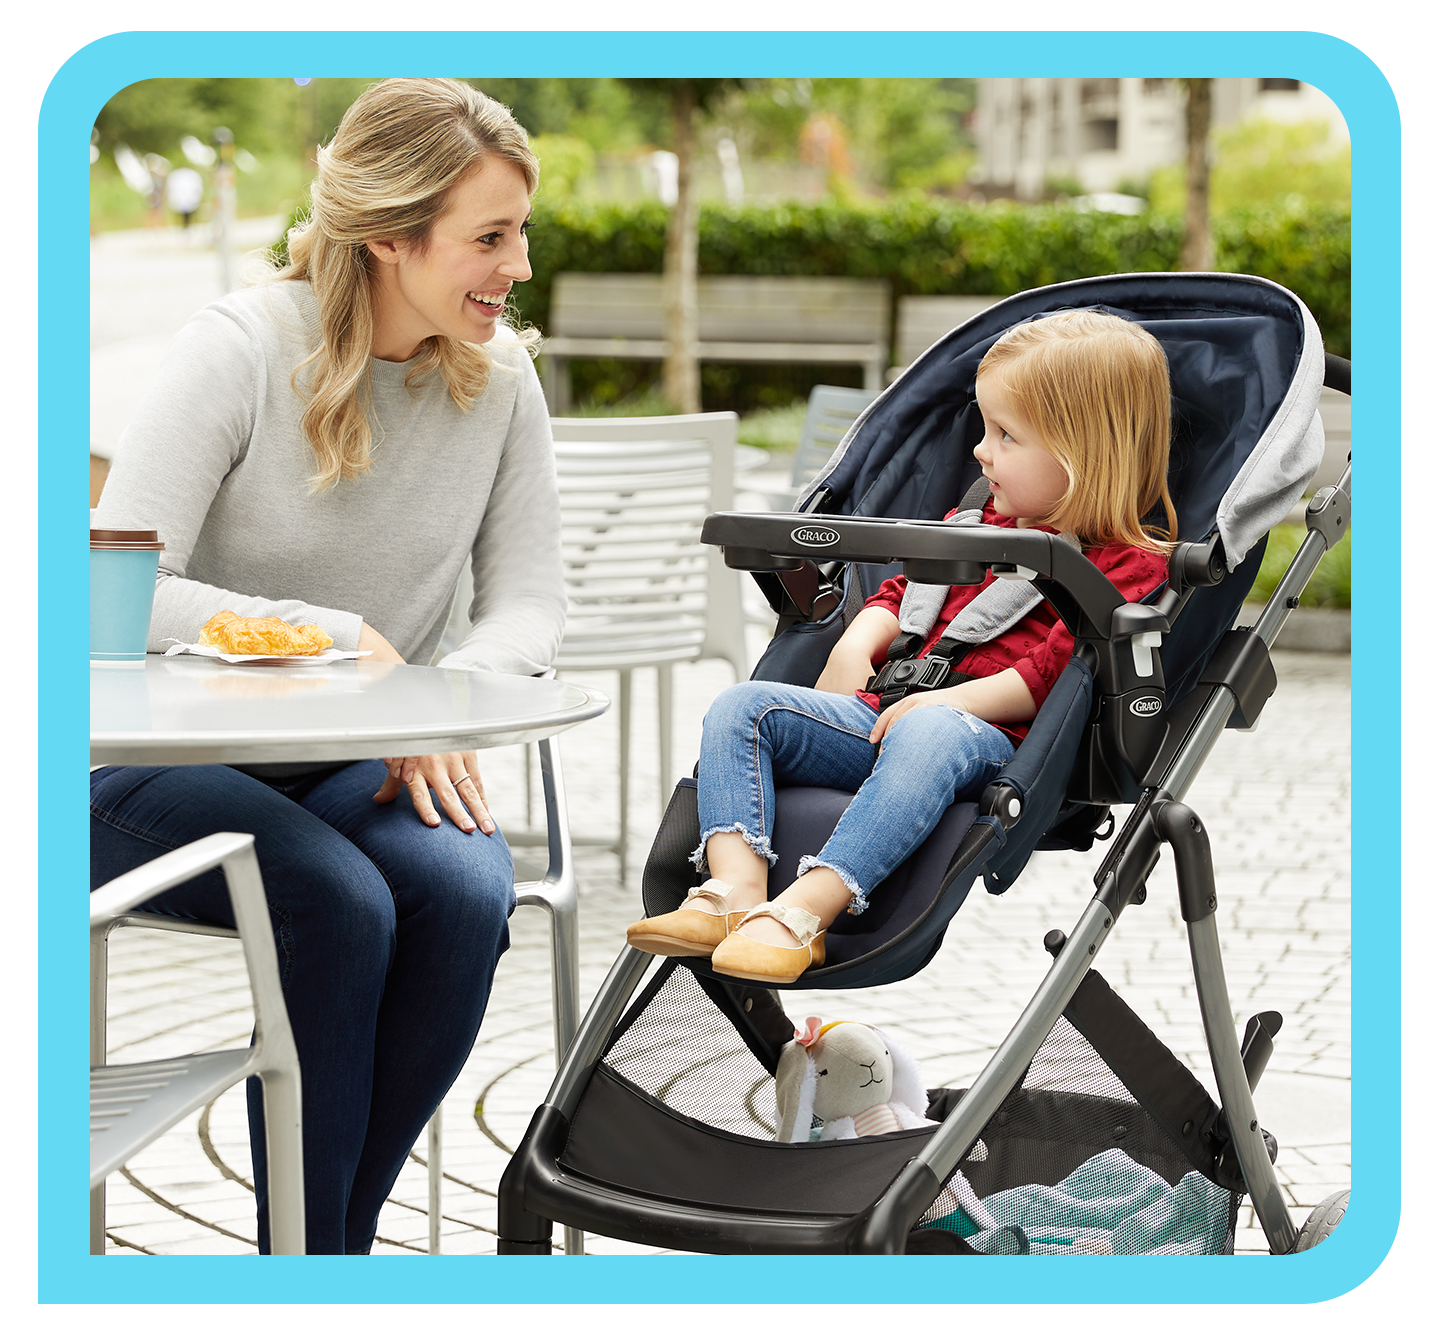 Graco - 25% off your purchase of 3 items